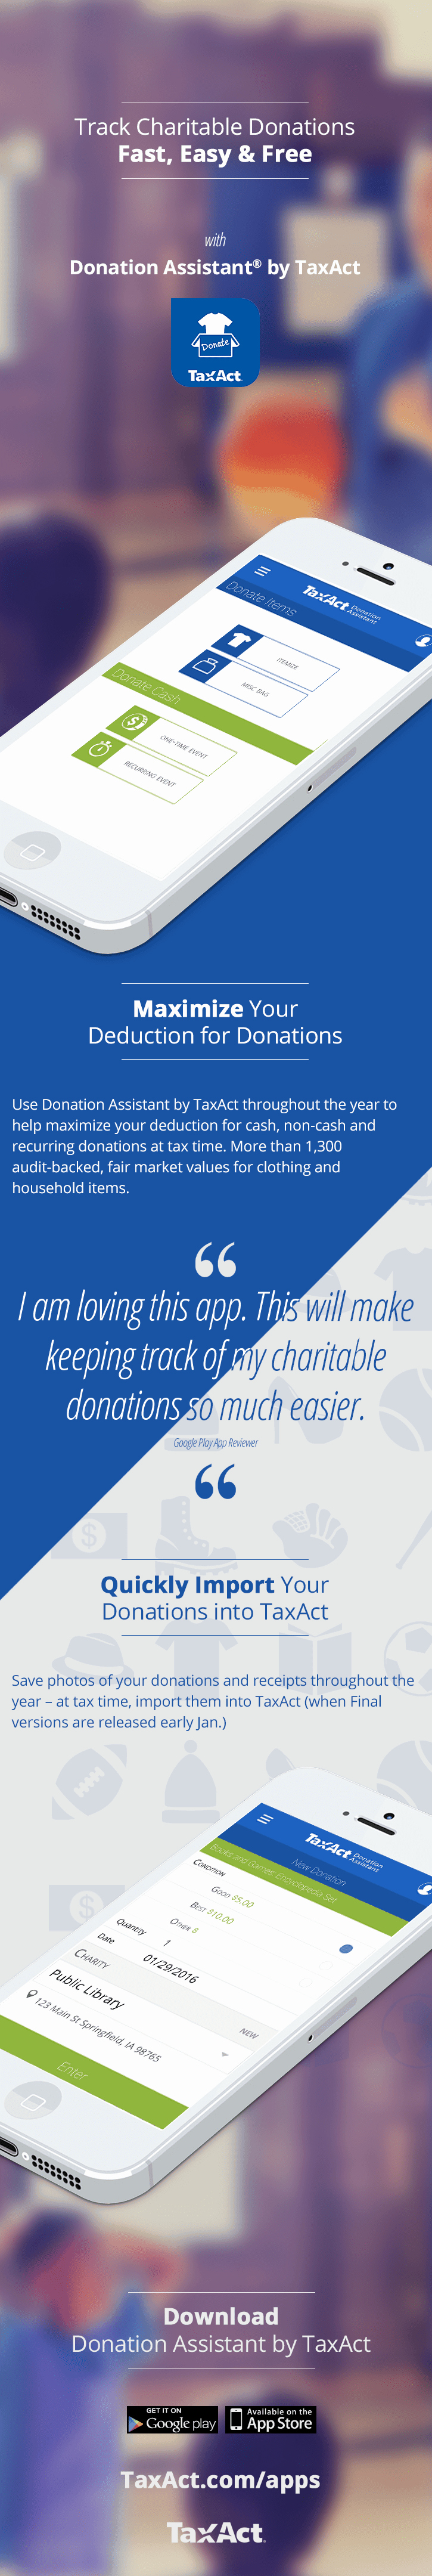 How to Track Charitable Donations New Maximize Your Tax Deduction for Charitable Contributions